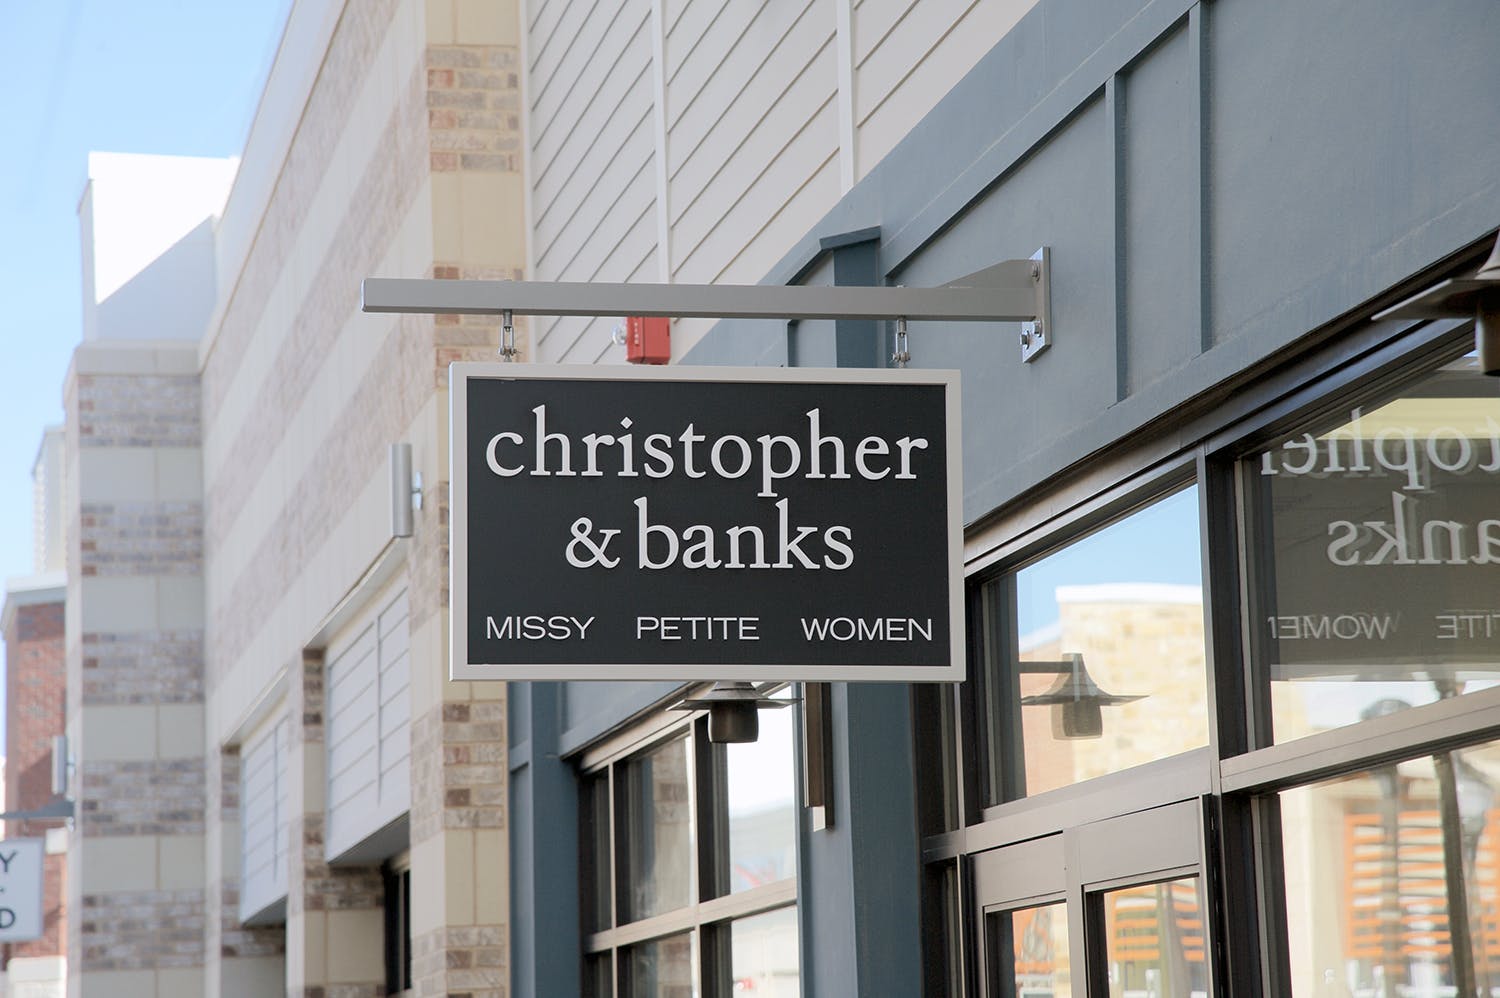 Christoper & Banks clothing store sign hanging outside the building